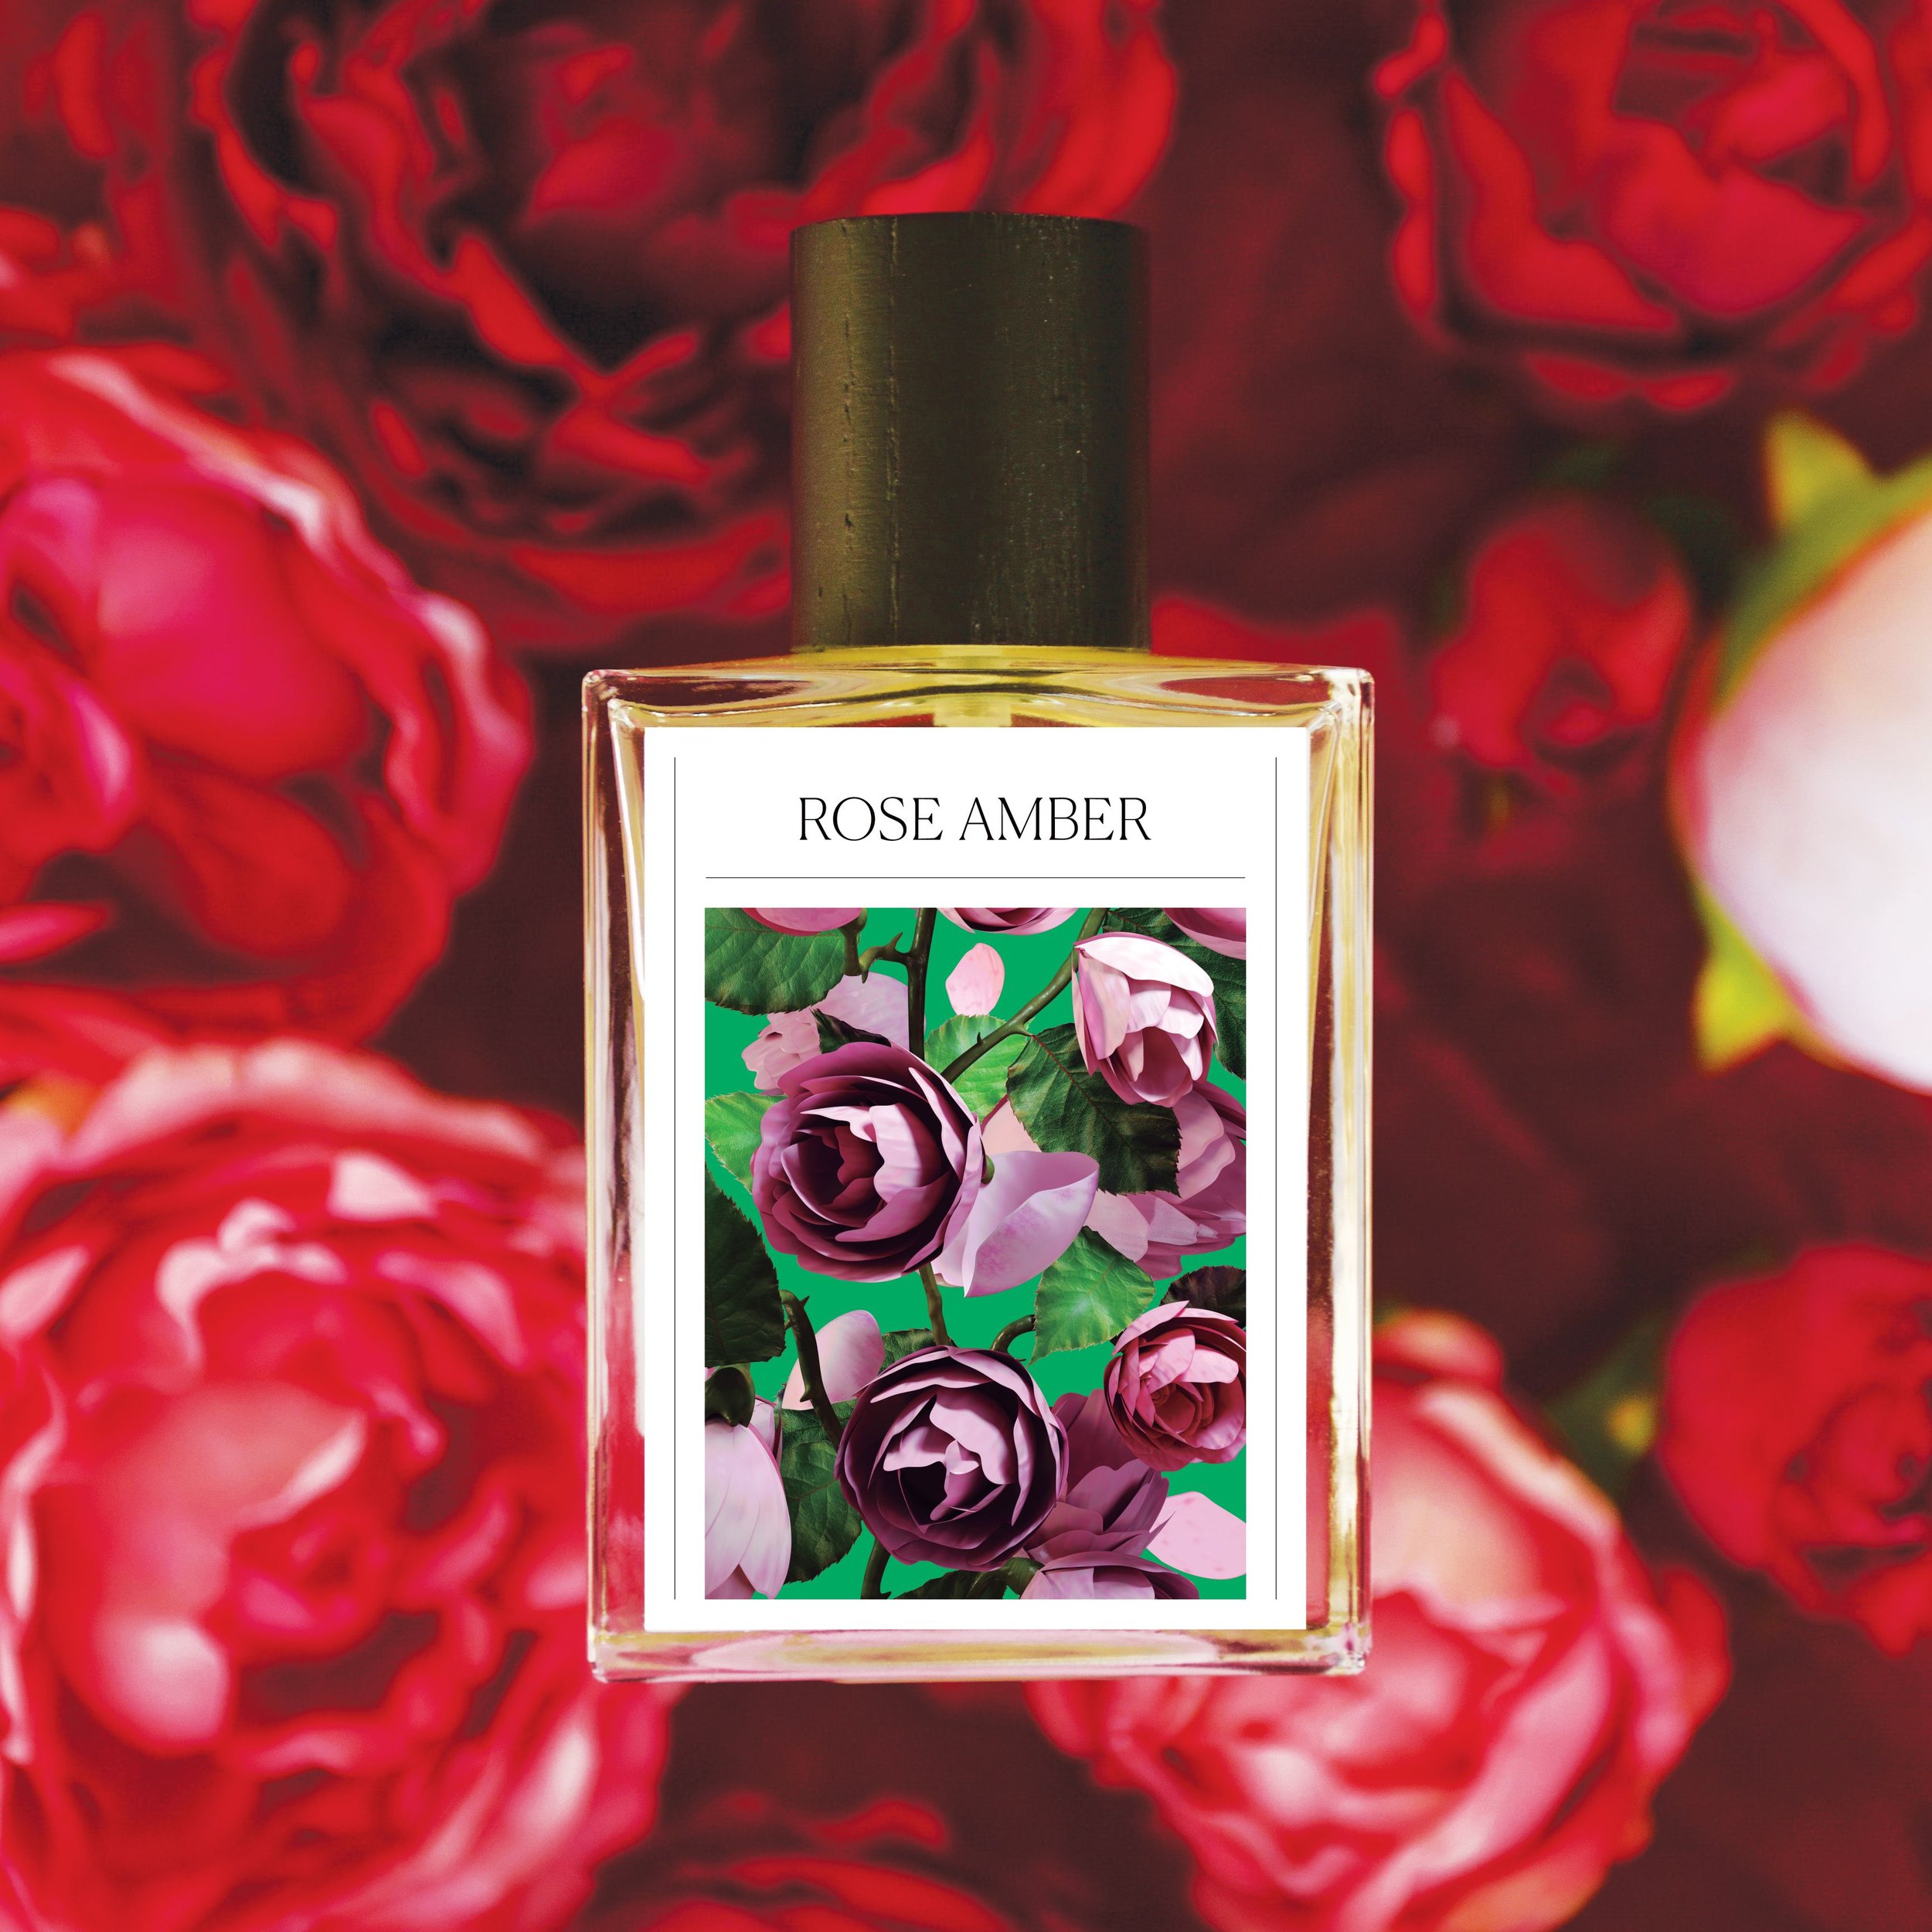 The 7 Virtues Want To Rebuild The World Through Perfume